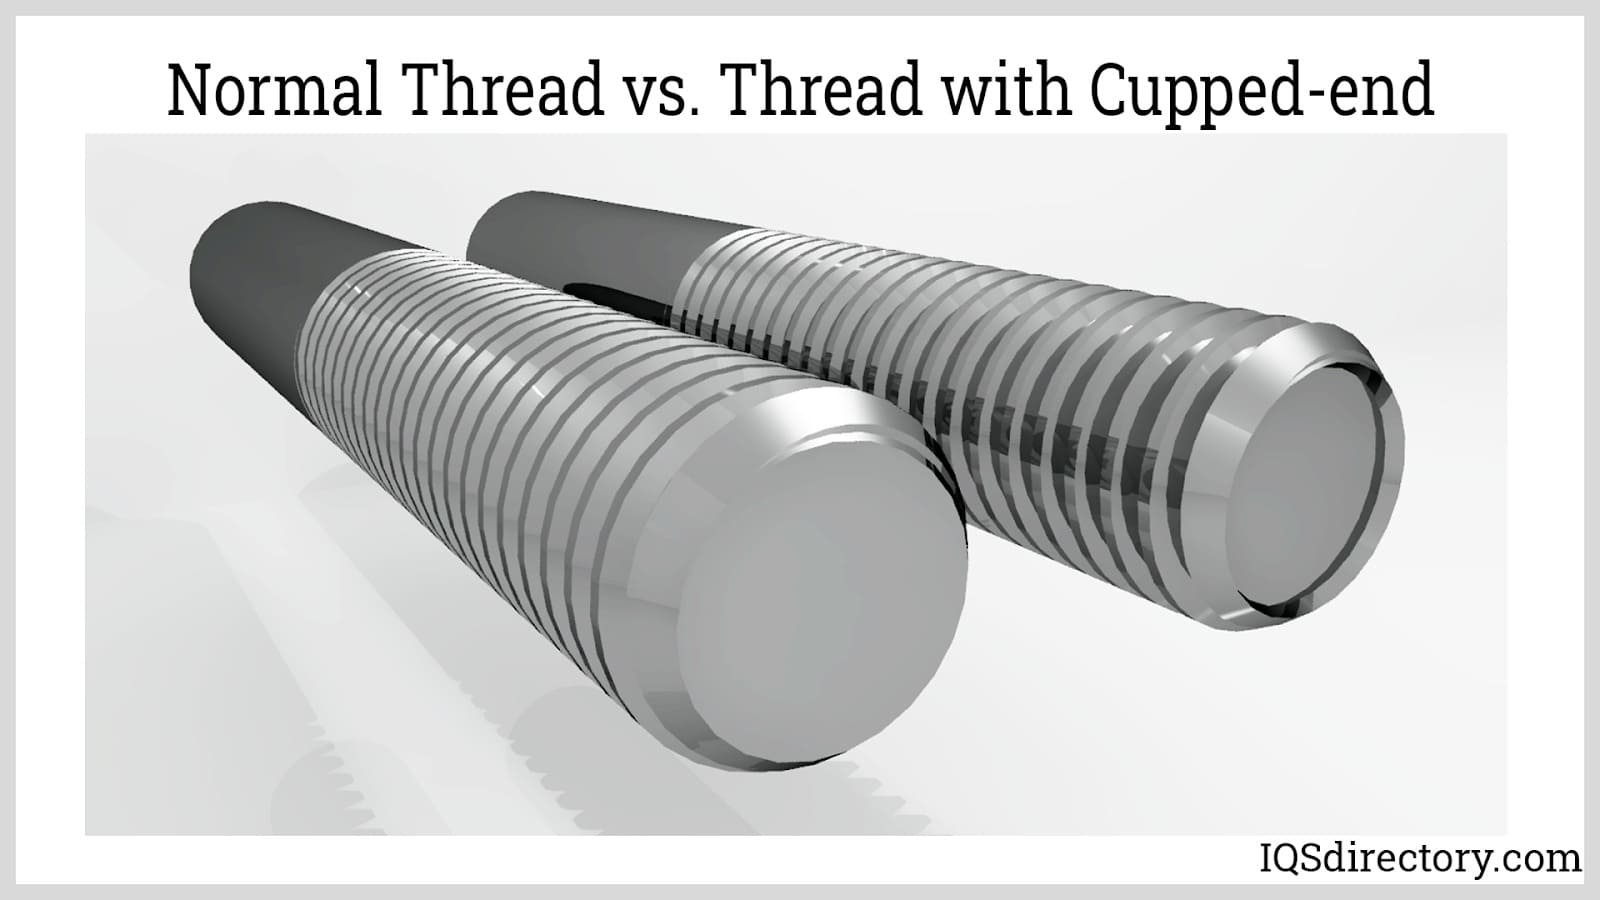 Normal Thread vs. Thread with Cupped-end